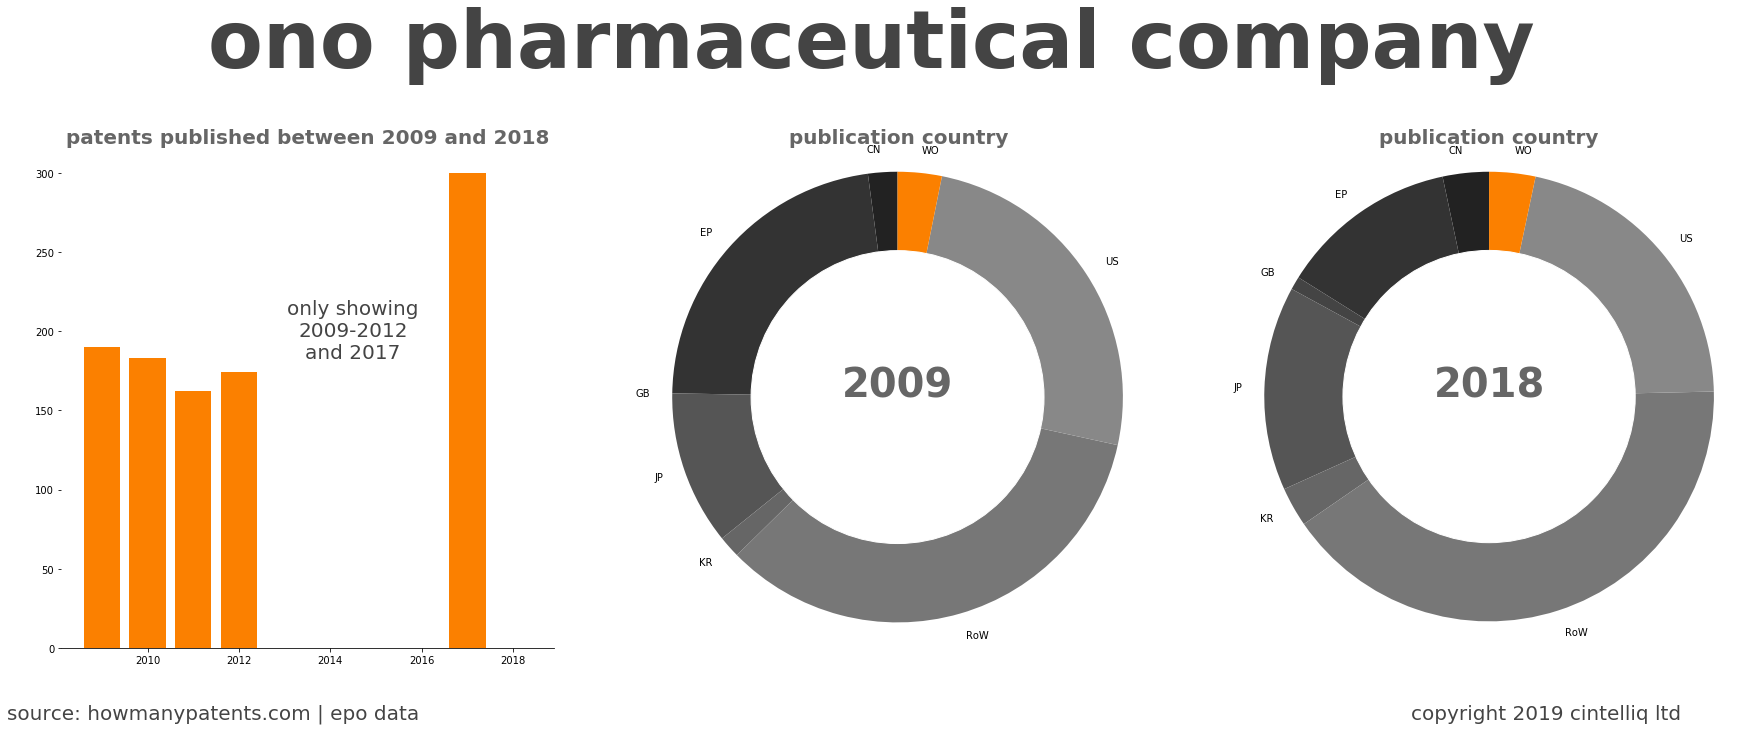 summary of patents for Ono Pharmaceutical Company